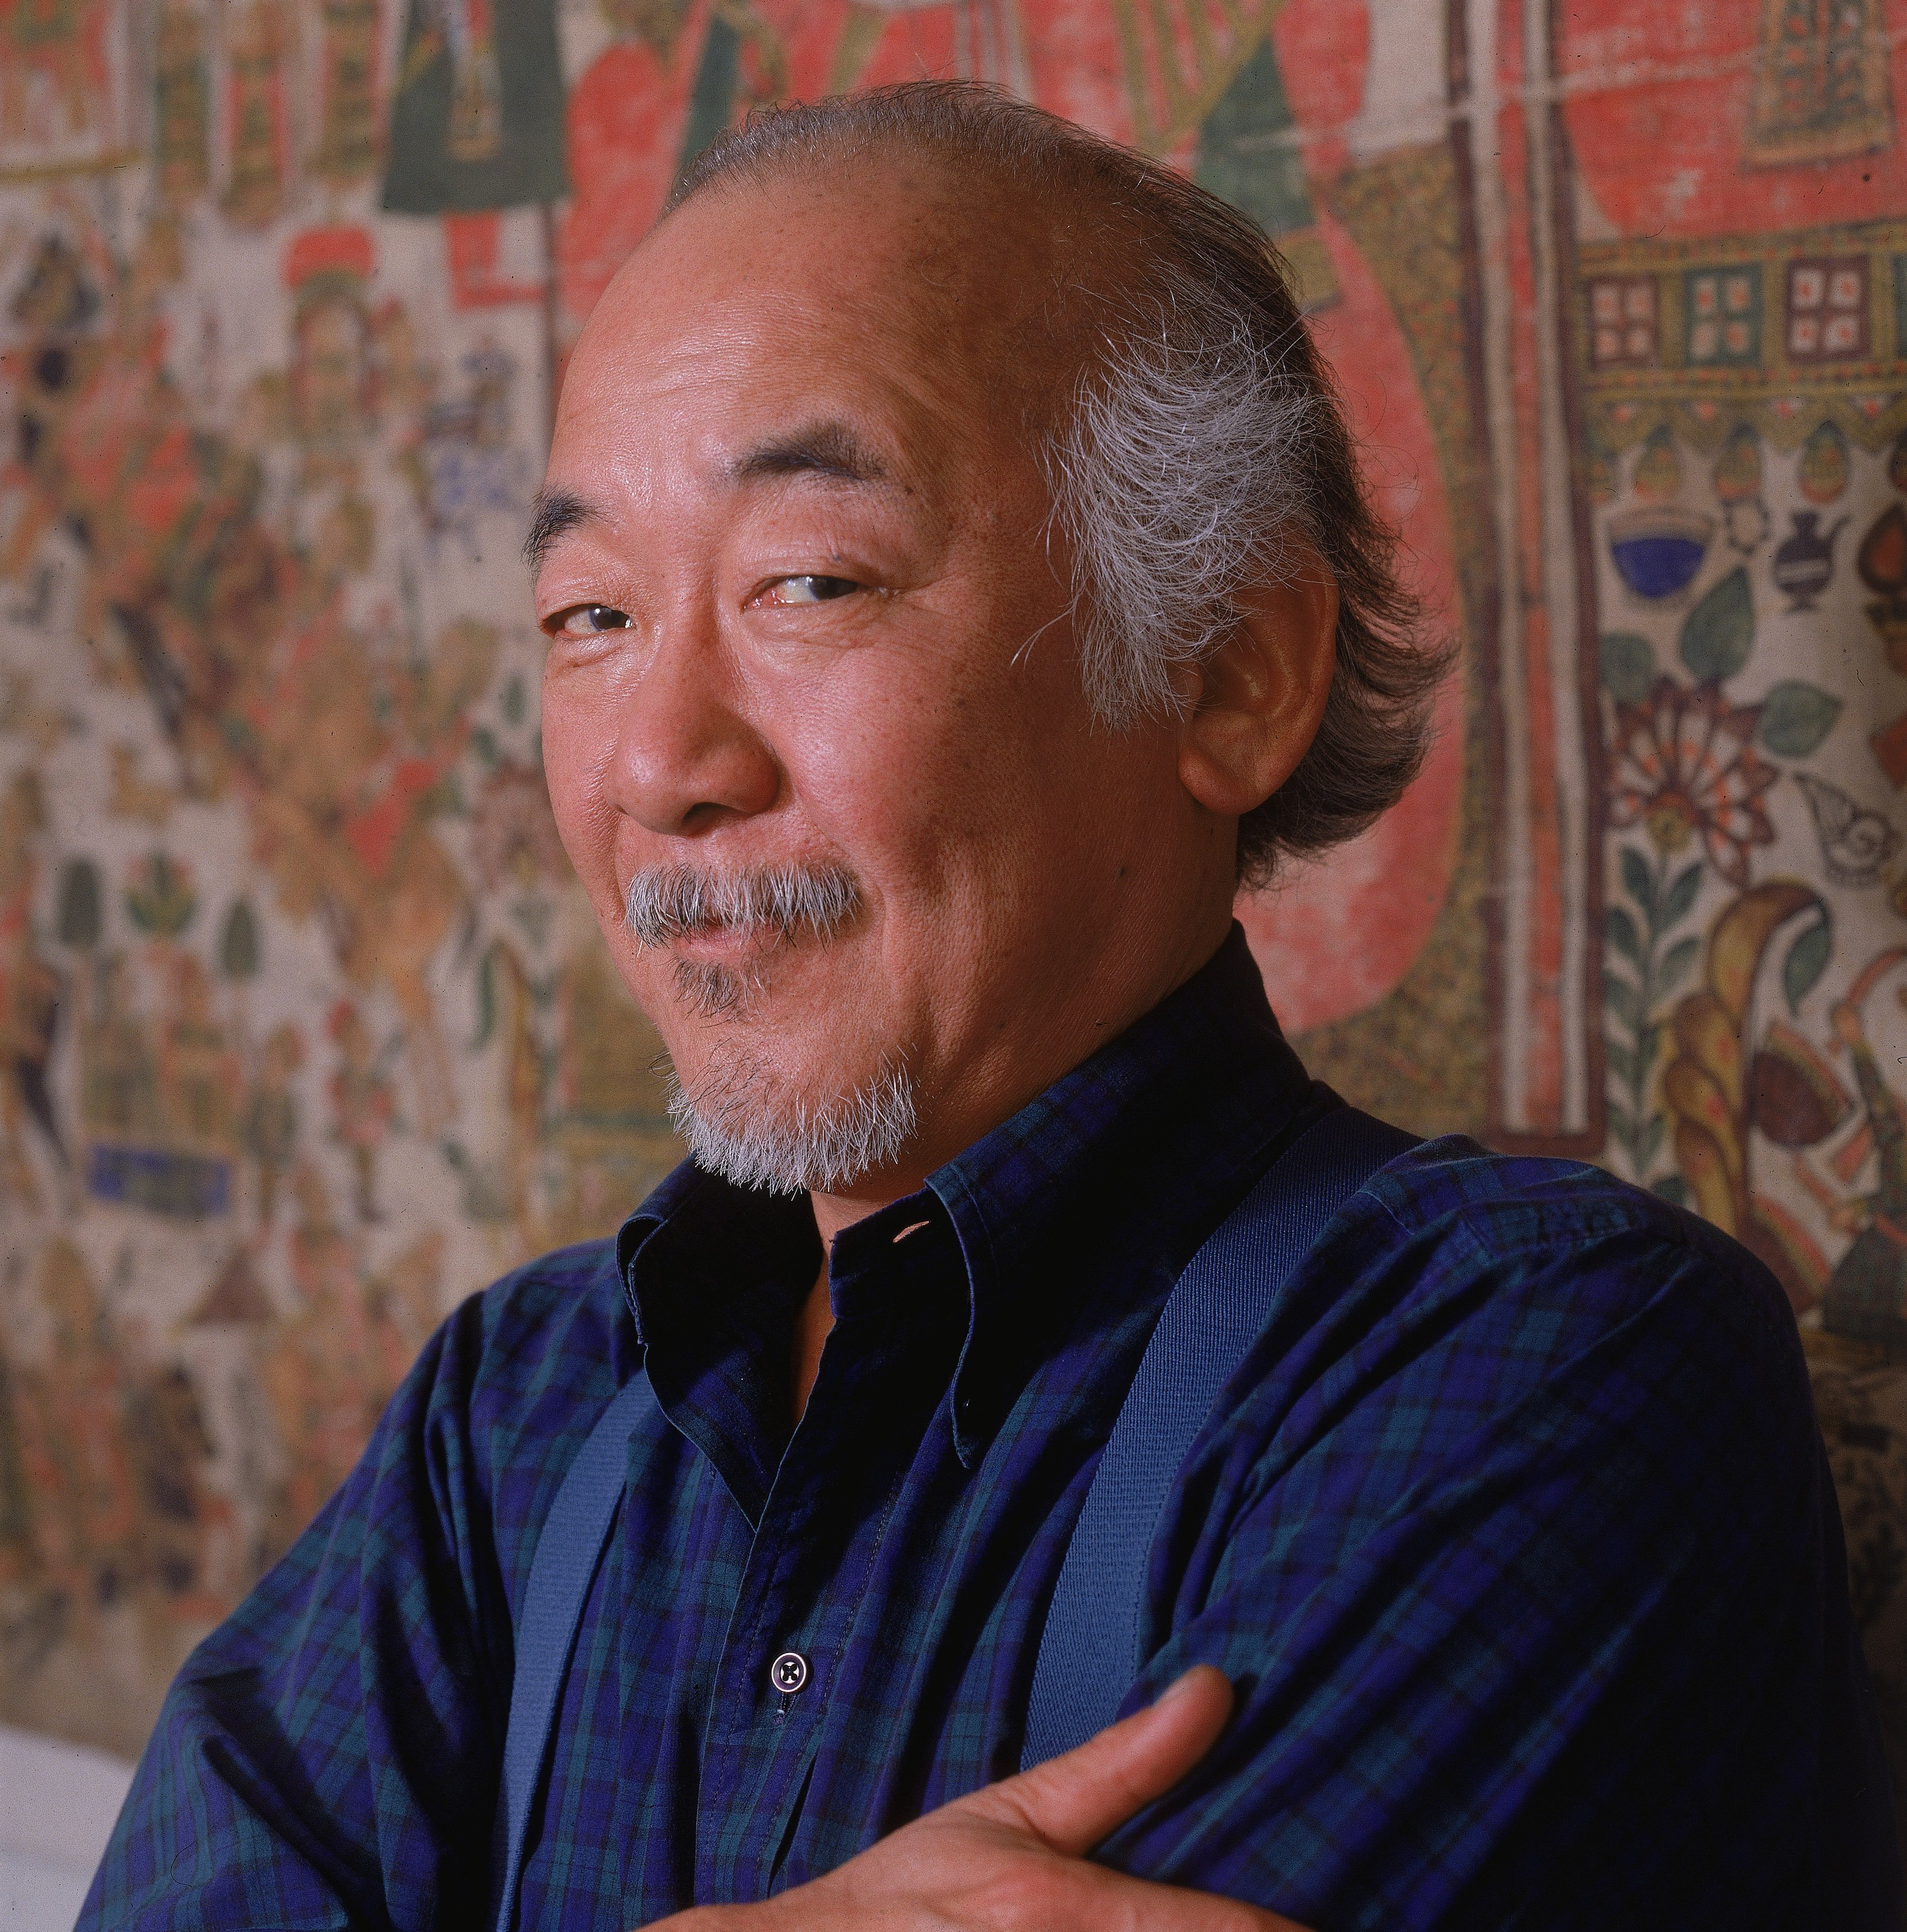 Comedian Pat Morita posing while standing against a tapestry, 1988. | Source: Getty Images